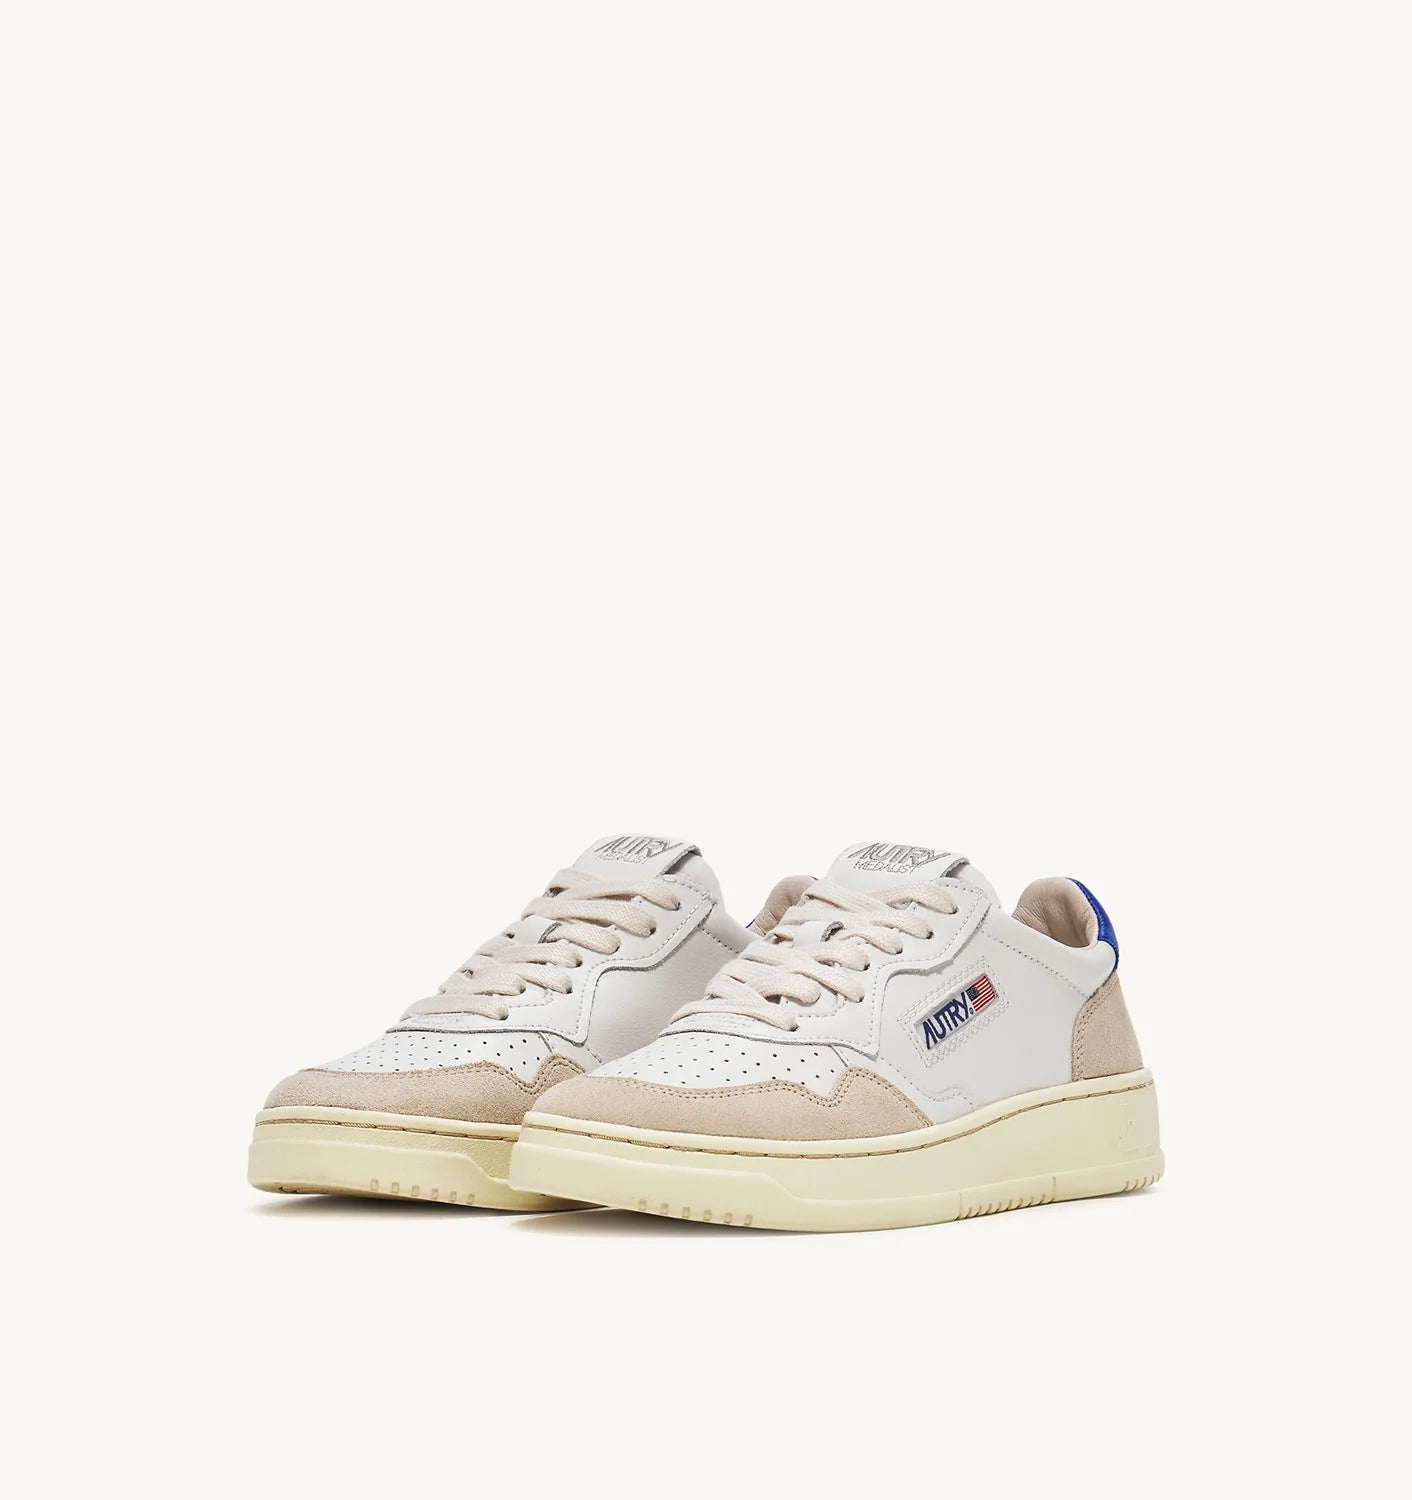 Medalist Low Sneakers In Suede And Leather Color White And Prince Blue